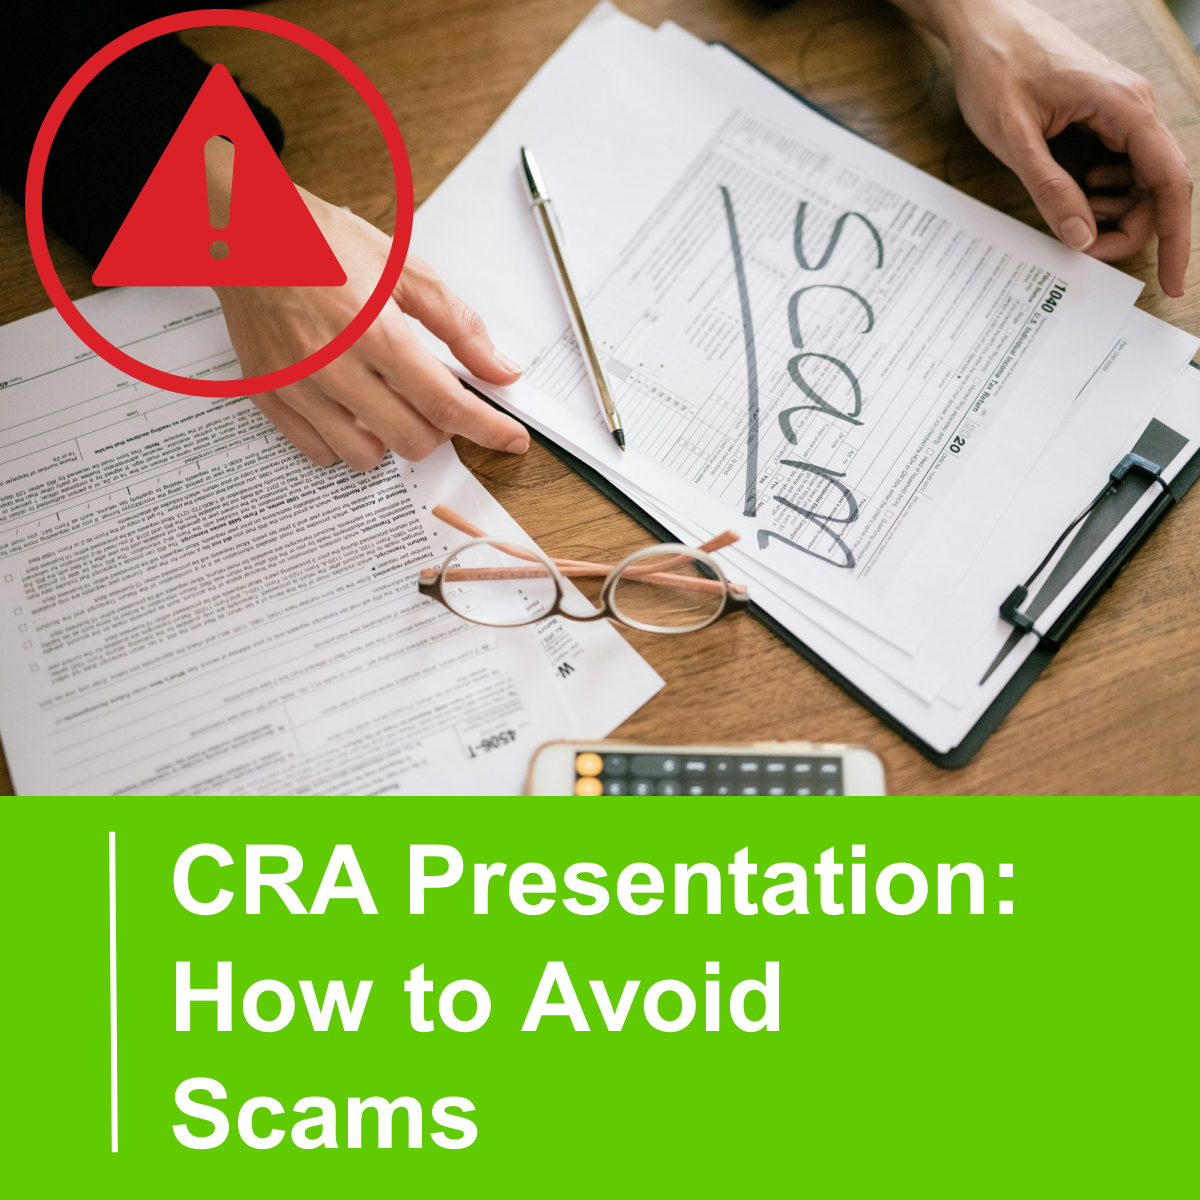 Photo of a hand holding a pen and papers on the desk with the word SCAM scrawled across one. Text reads CRA Presentation: How to Avoid Scams.